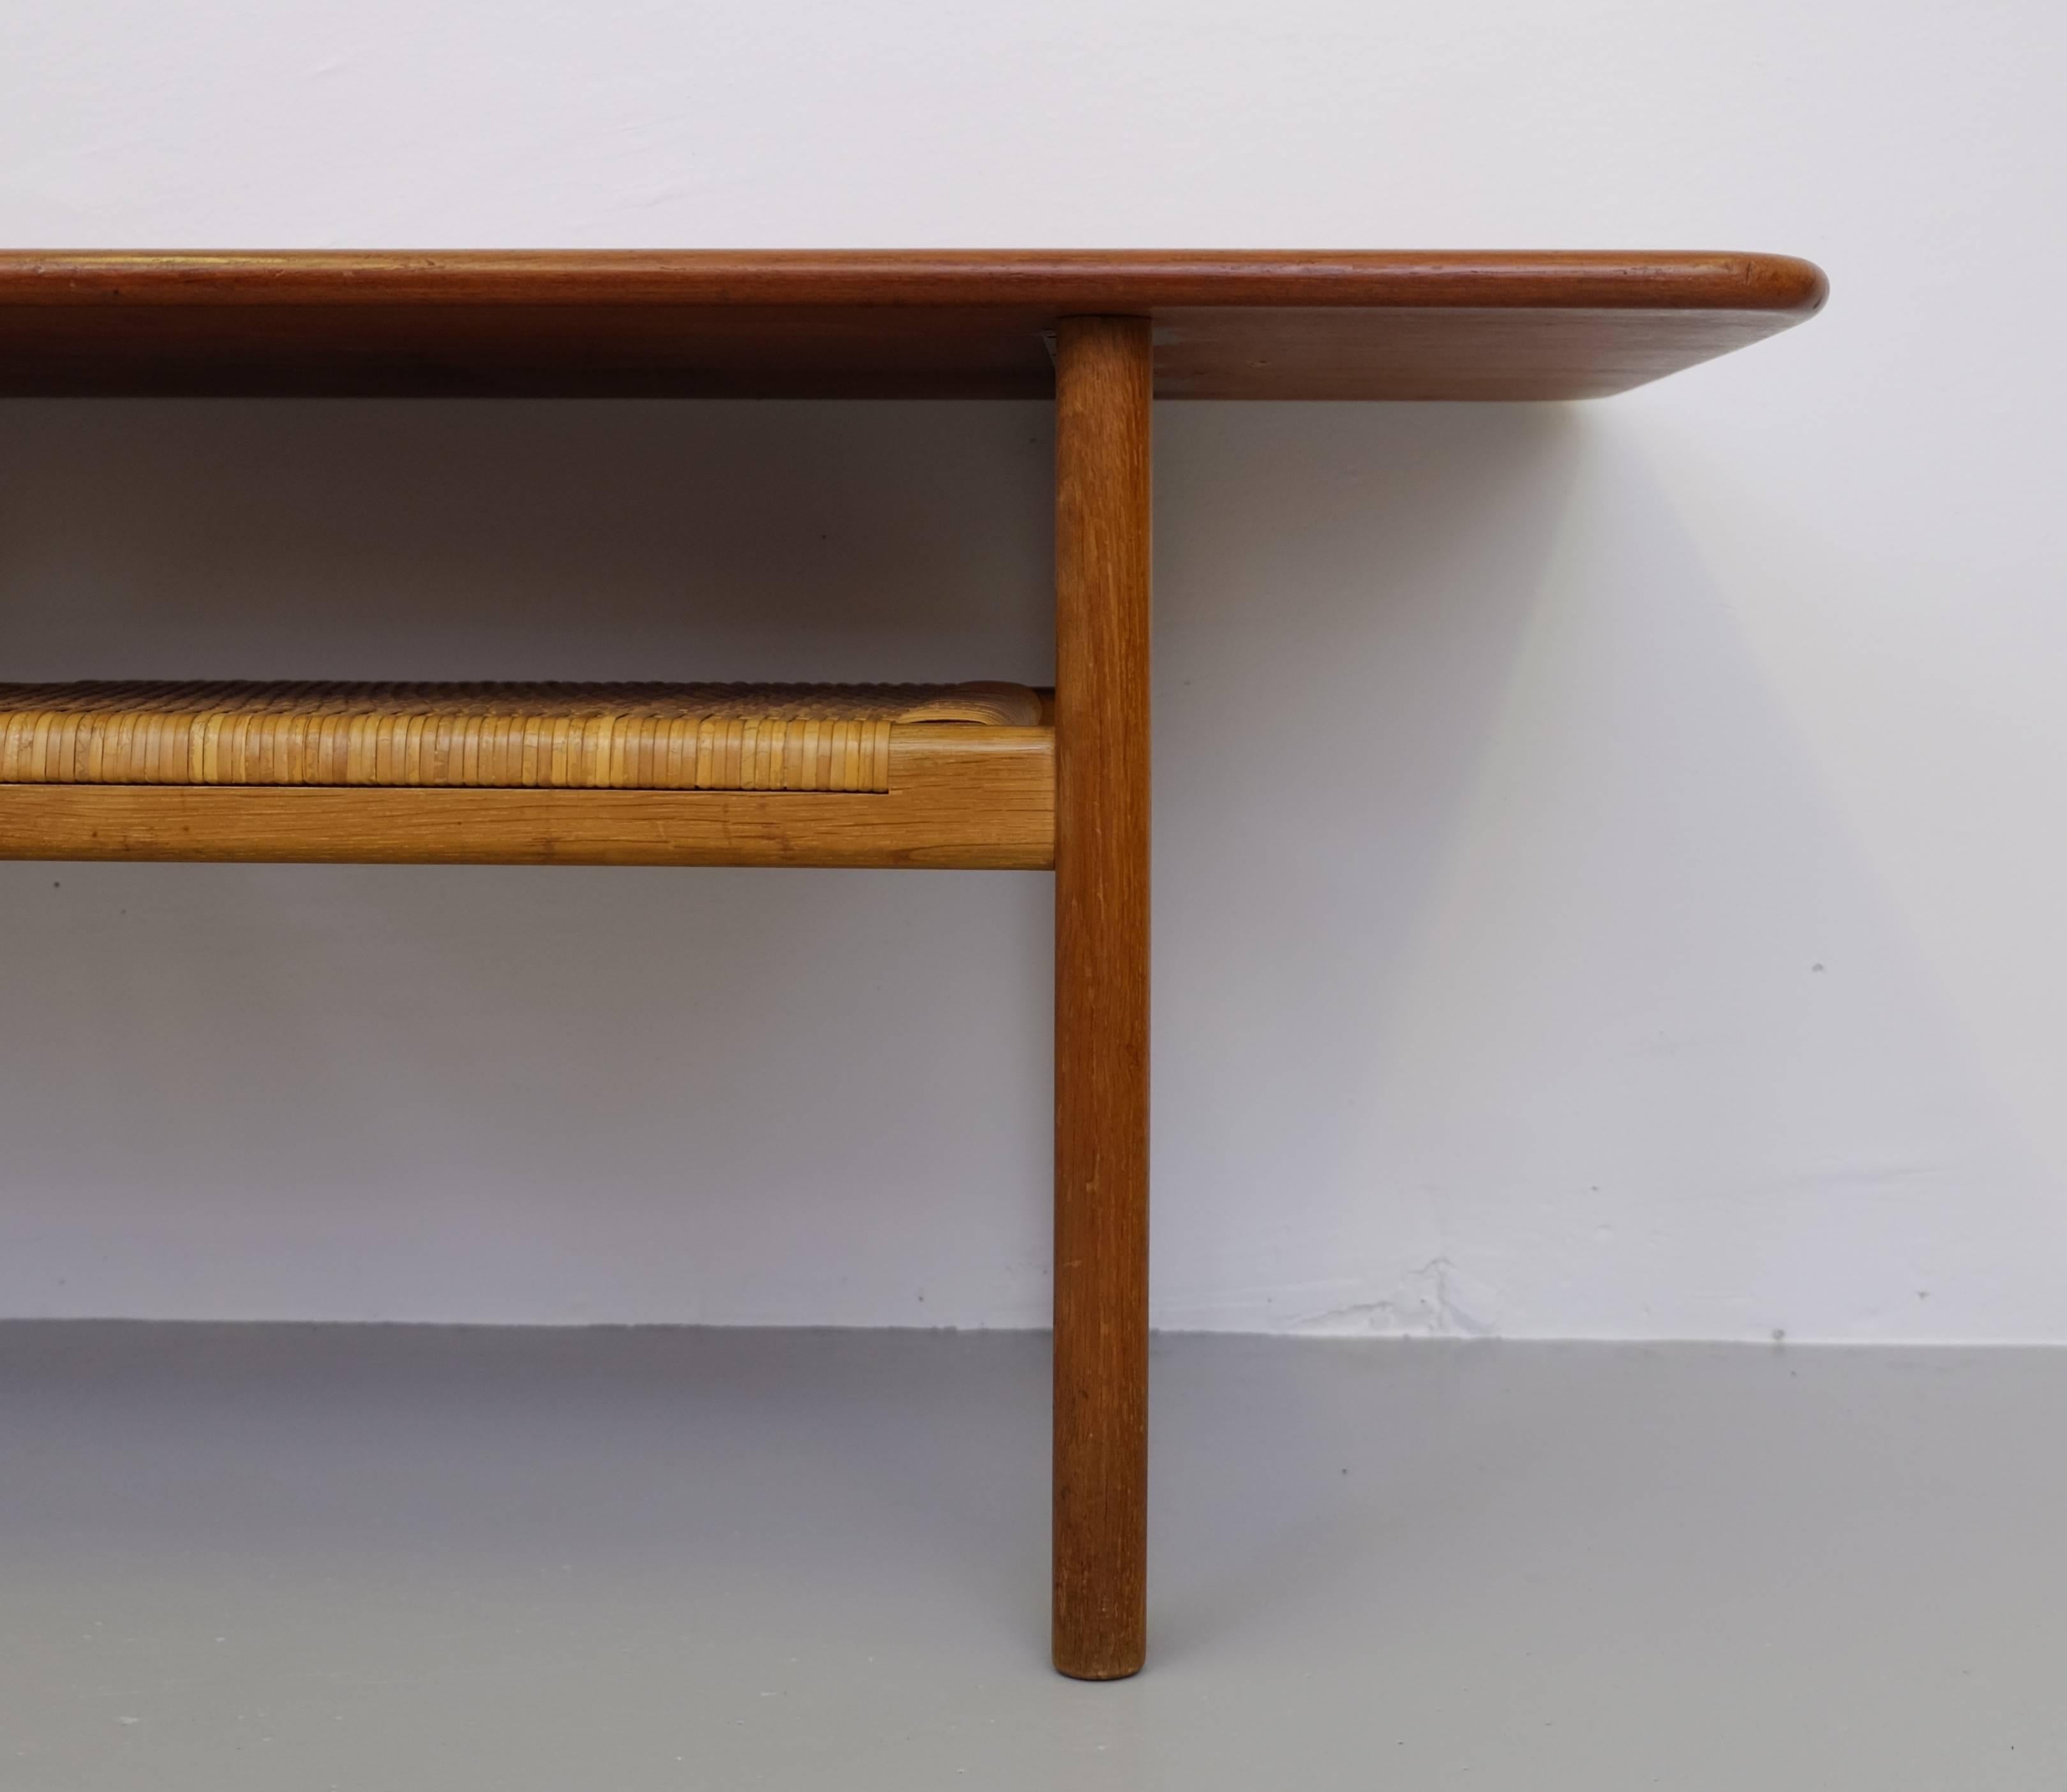 Coffee table model AT-10 design Hans J. Wegner.
Teak and cane, produced by Andreas Tuck in Denmark, 1950s.